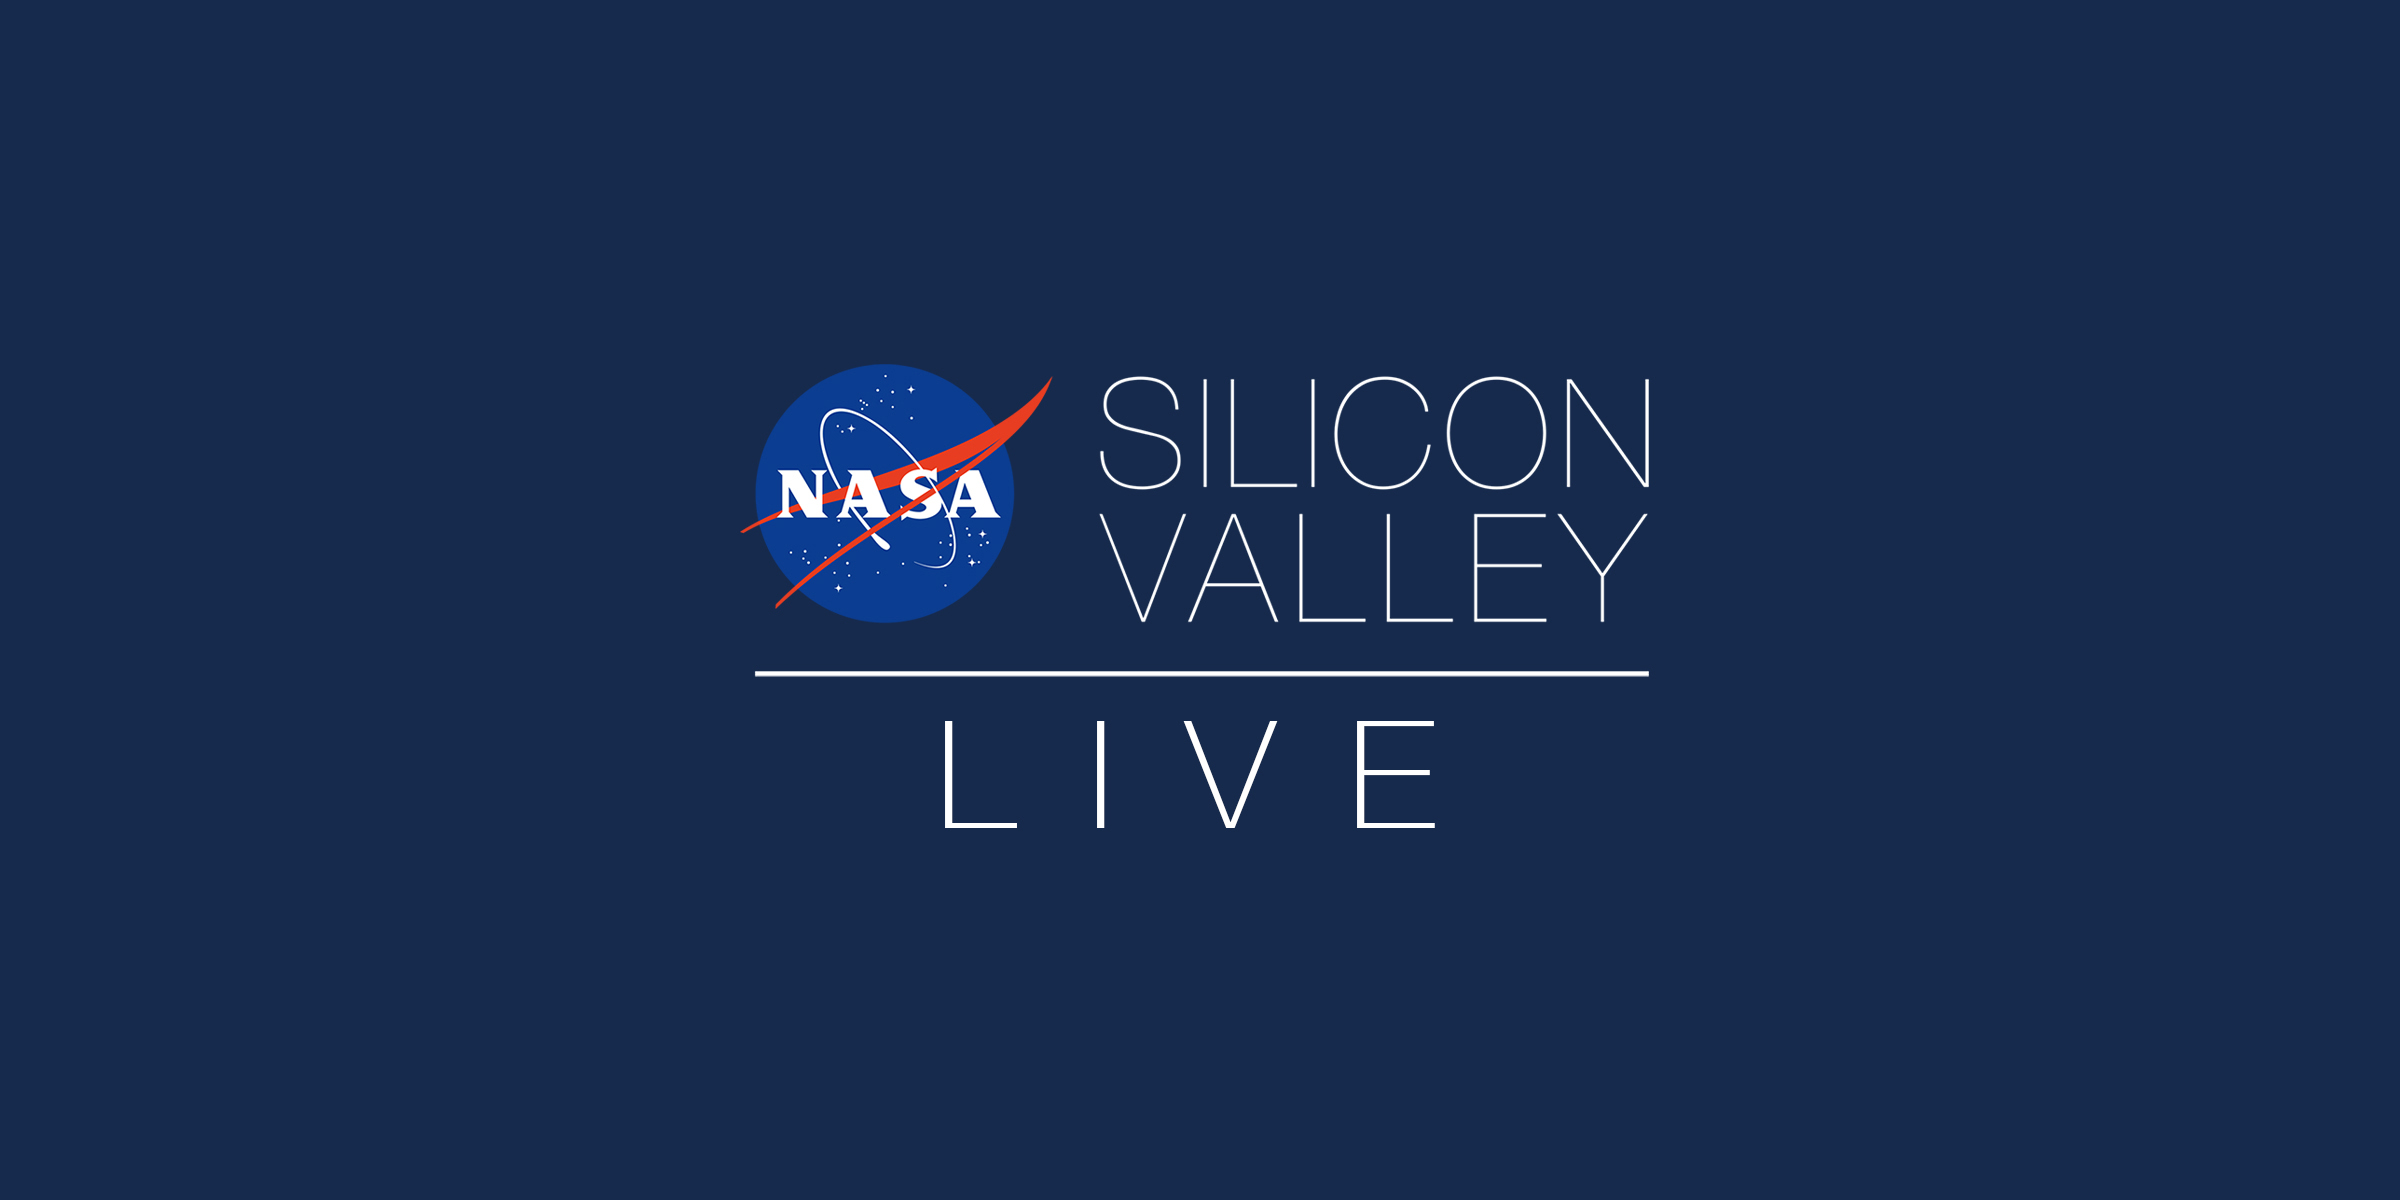 NASA in Silicon Valley Live - The World’s Largest Flying Telescope